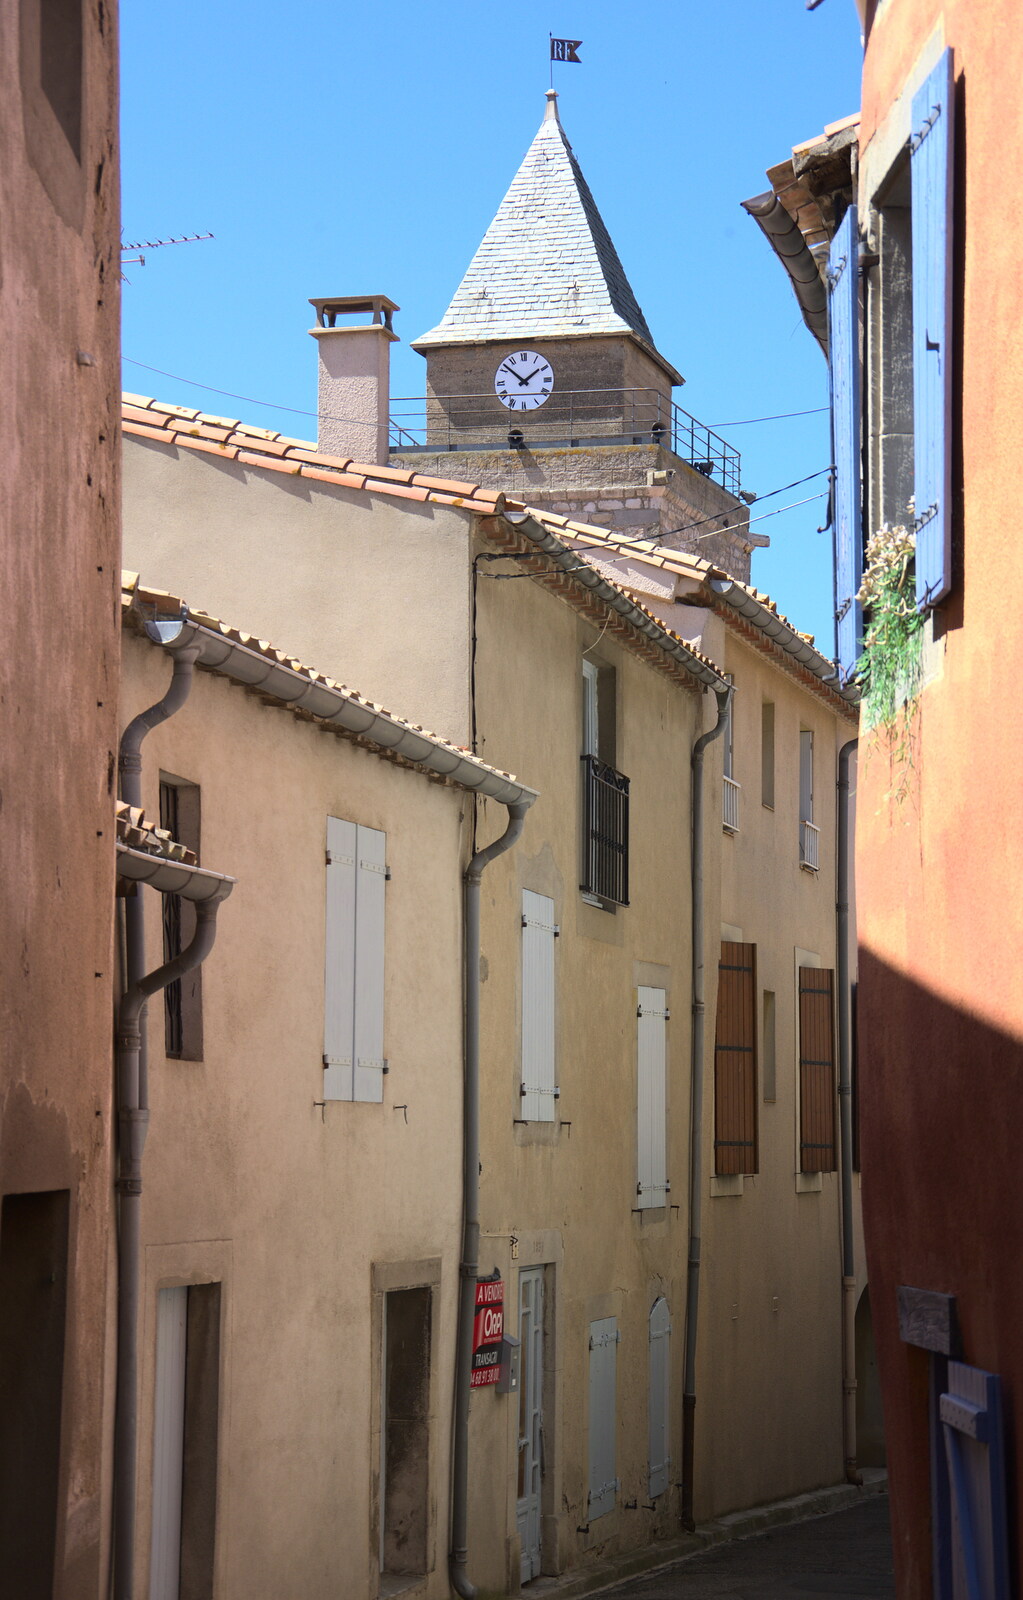 Villeneuve back street and clock tower from Le Gouffre Géant and Grotte de Limousis, Petanque and a Lightning Storm, Languedoc, France - 12th August 2018